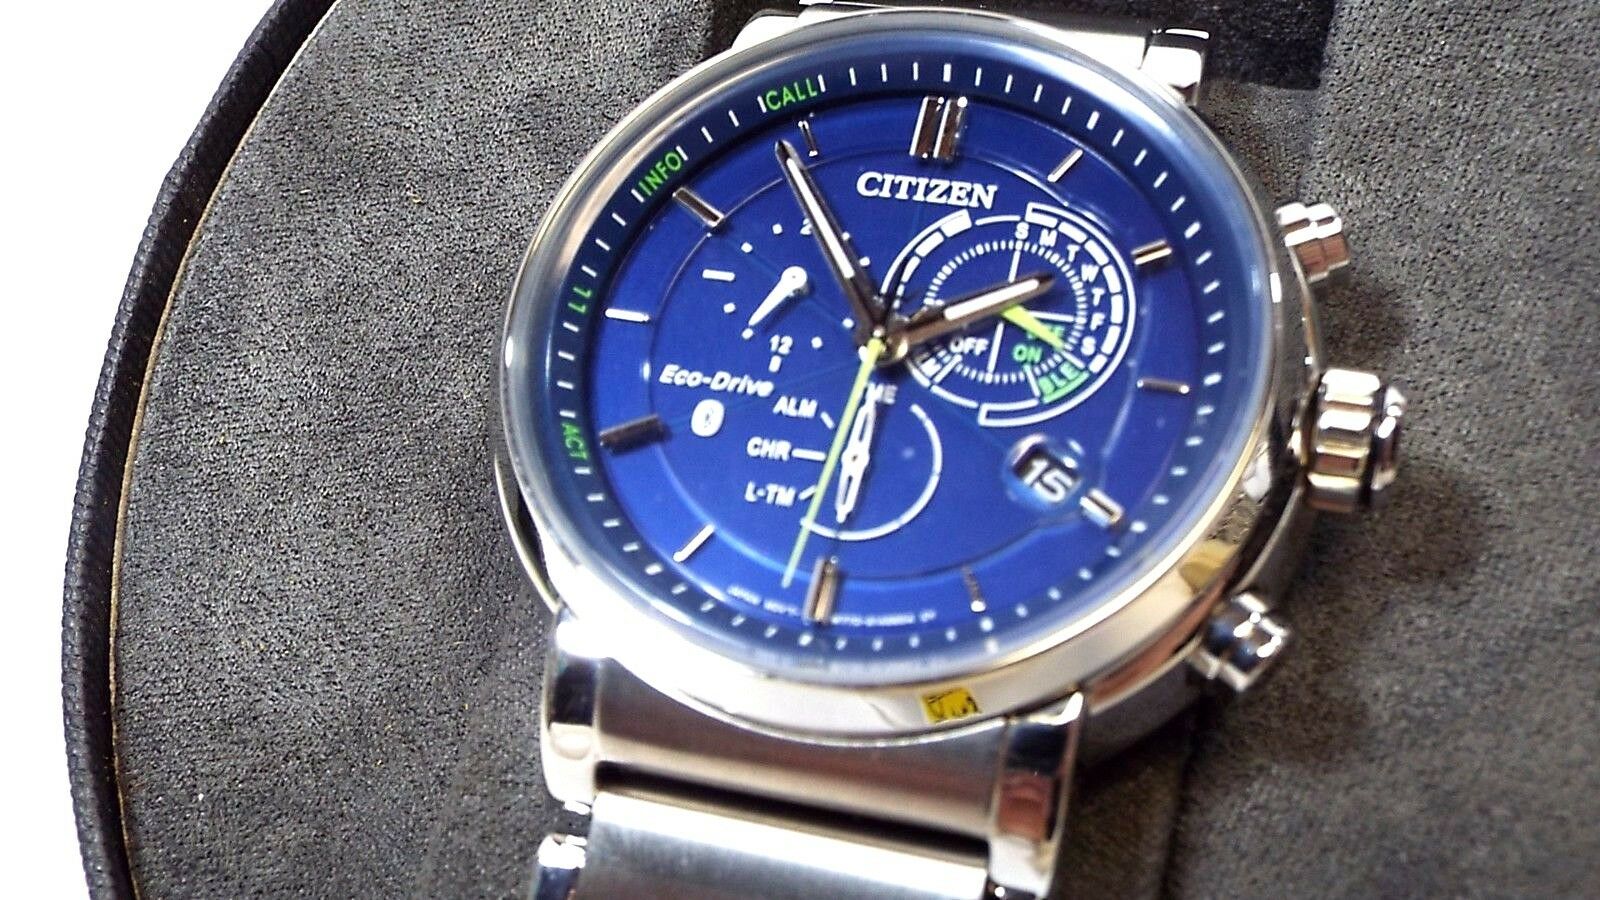 Citizen Eco Drive Proximity Chronograph Blue Dial all Stainless